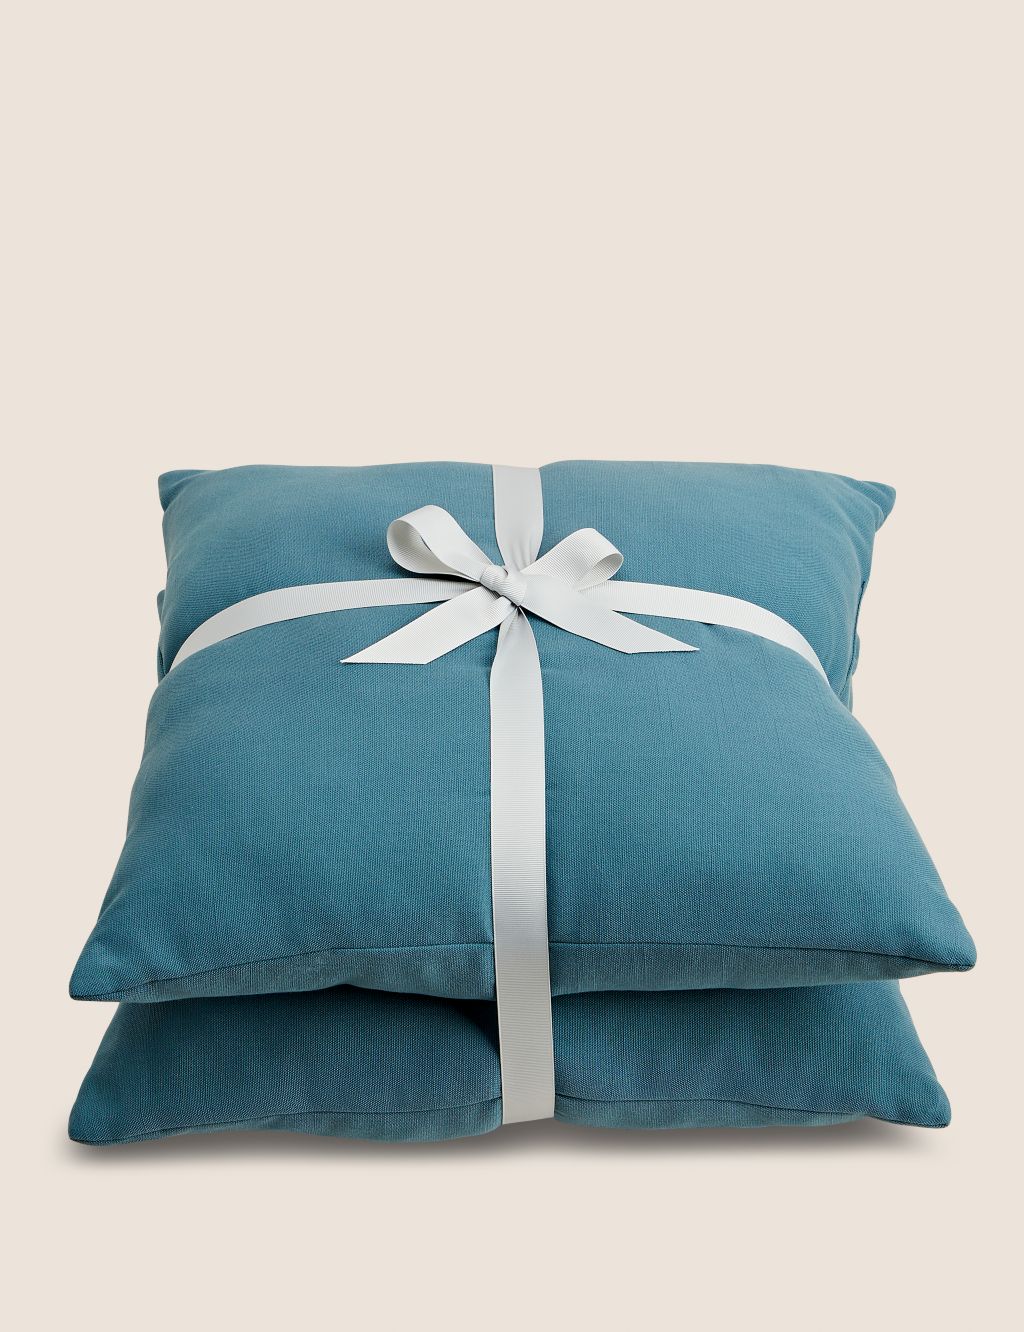 Set of 2 Outdoor Cushions image 5